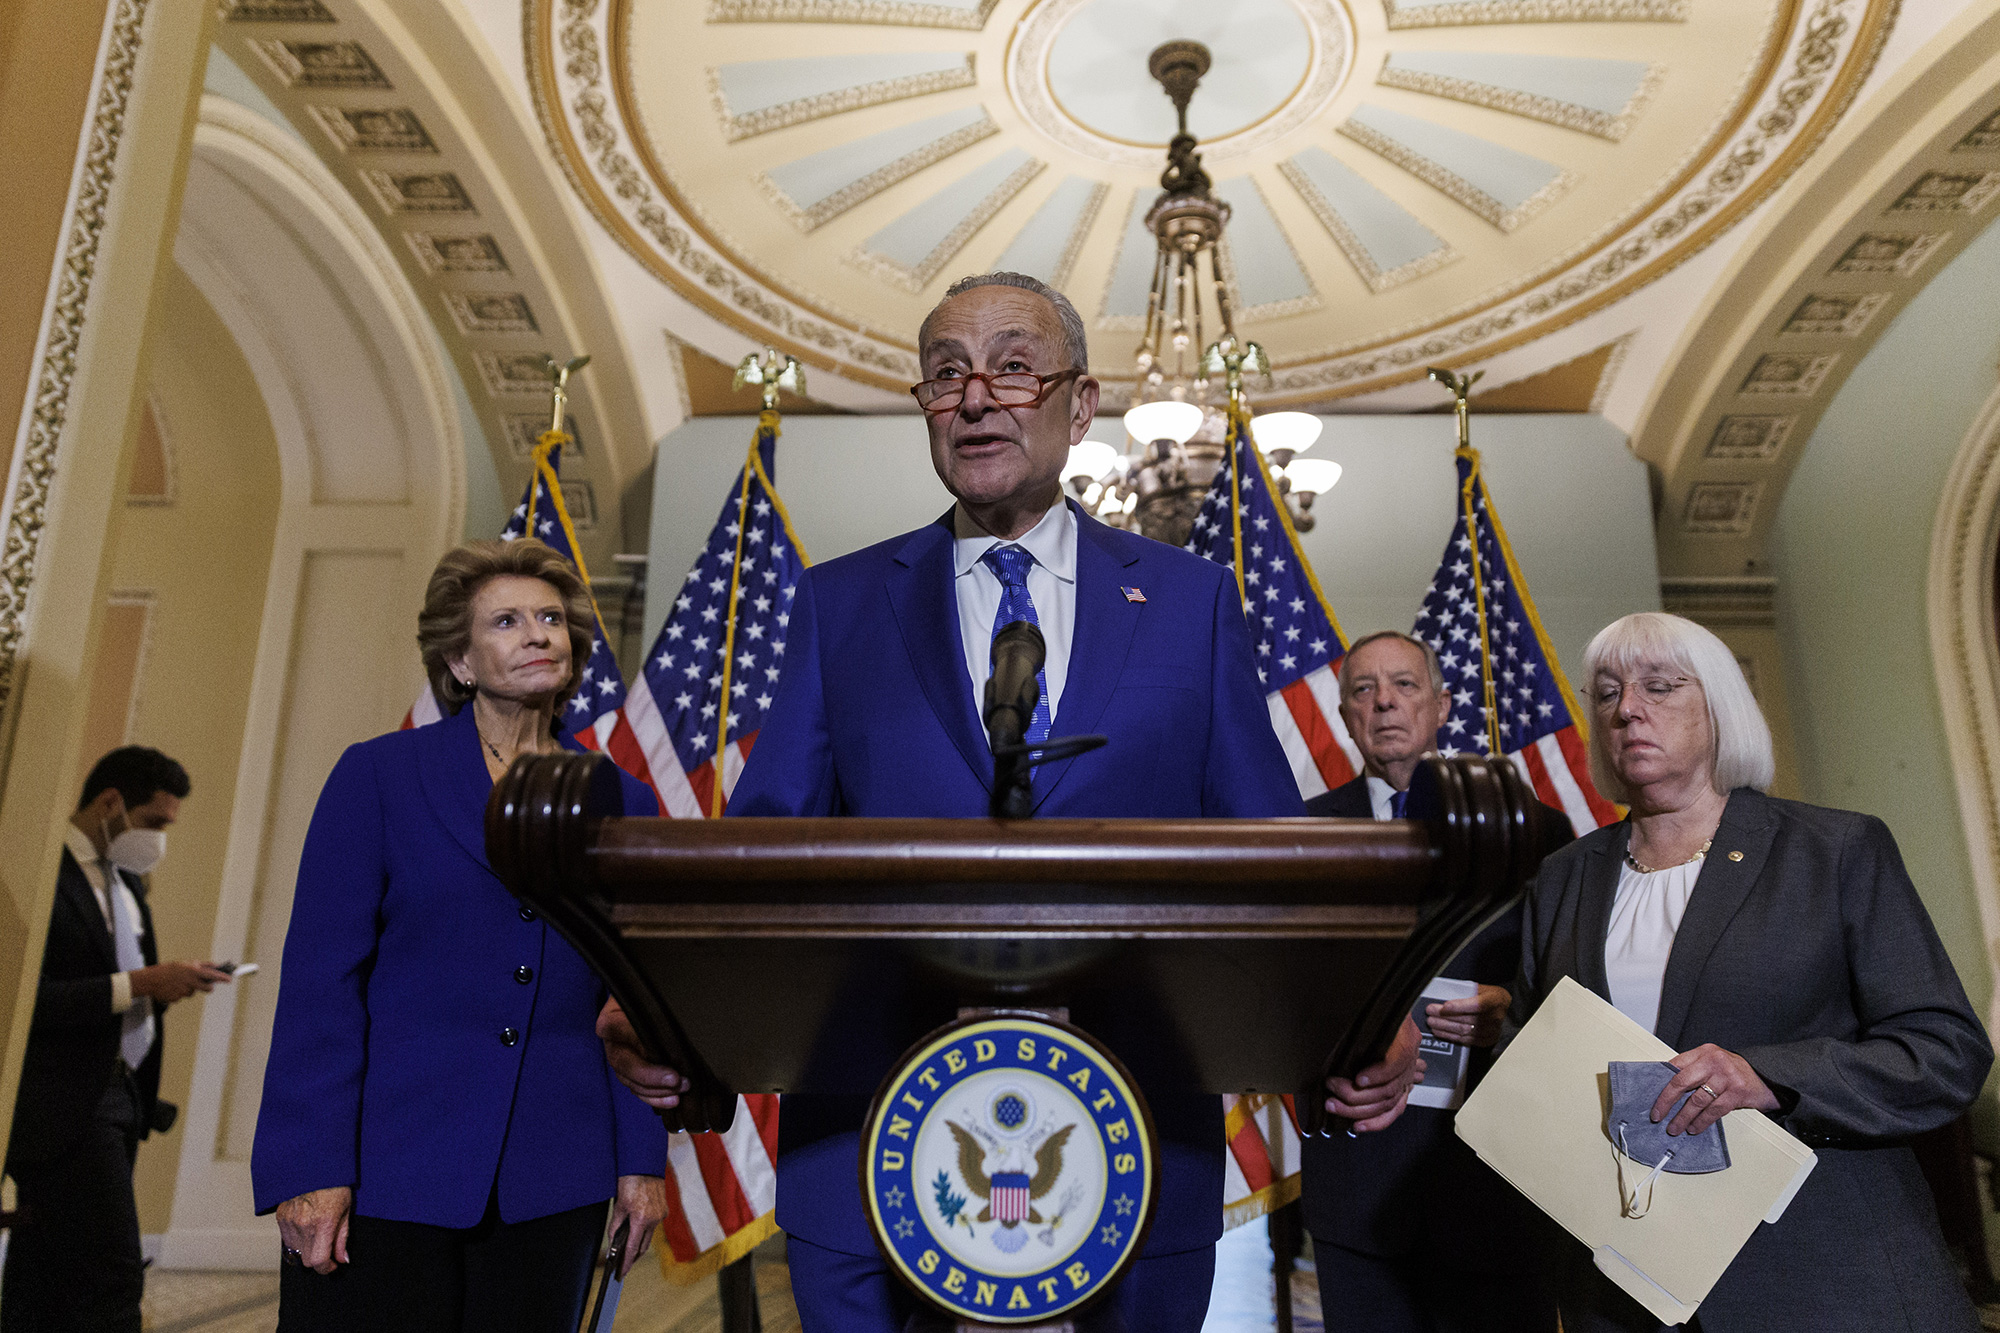 Senate Majority Leader Chuck Schumer speaks at the US Capitol on Wednesday, June 22.